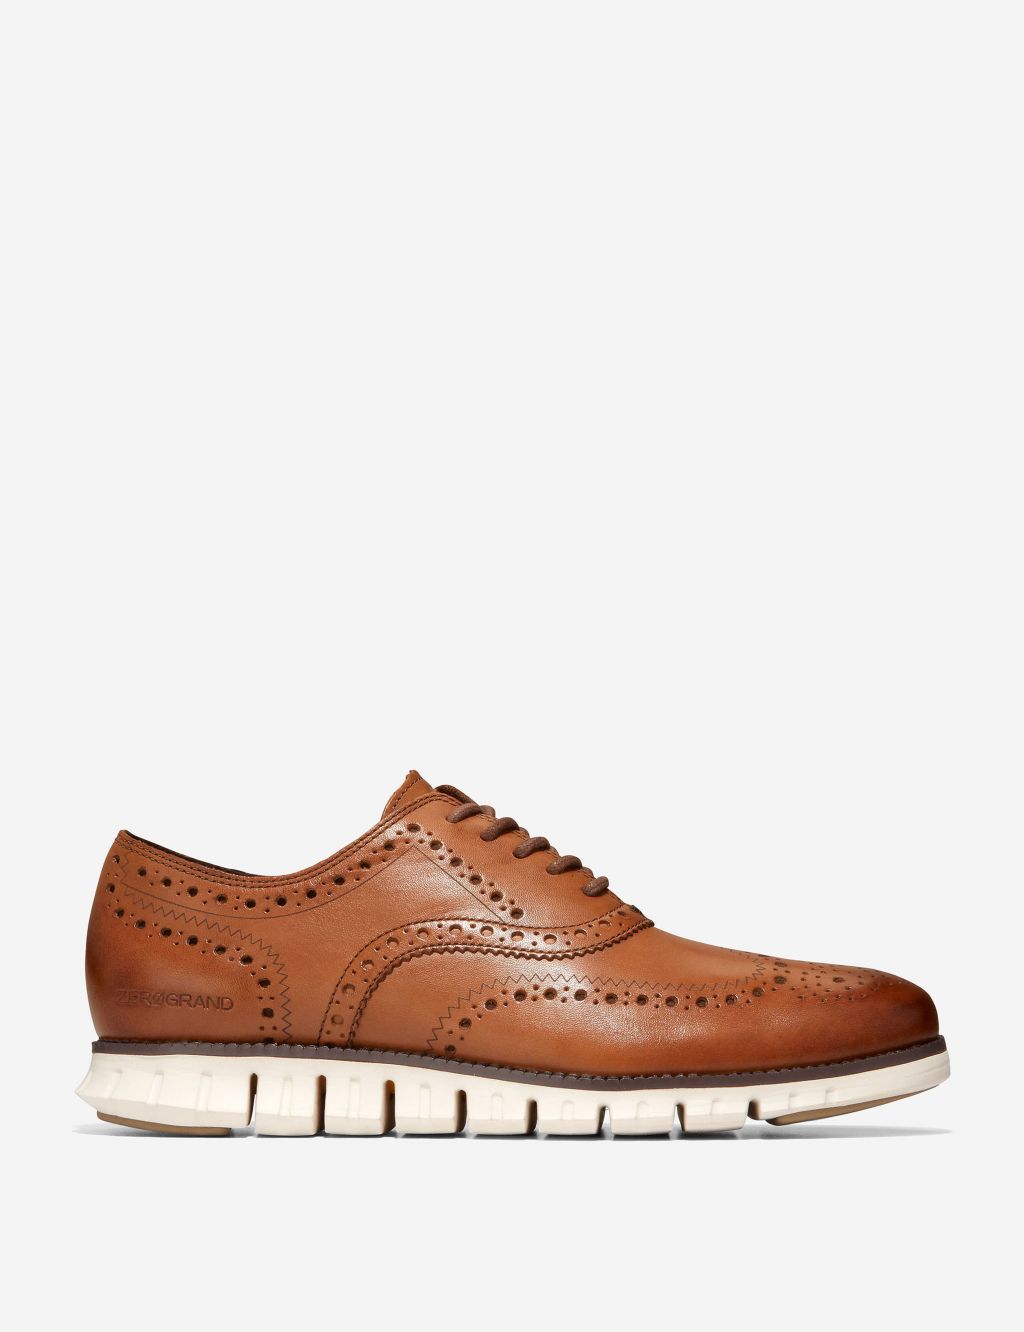 Wide Fit Zerogrand Wingtip Oxford Shoes image 1